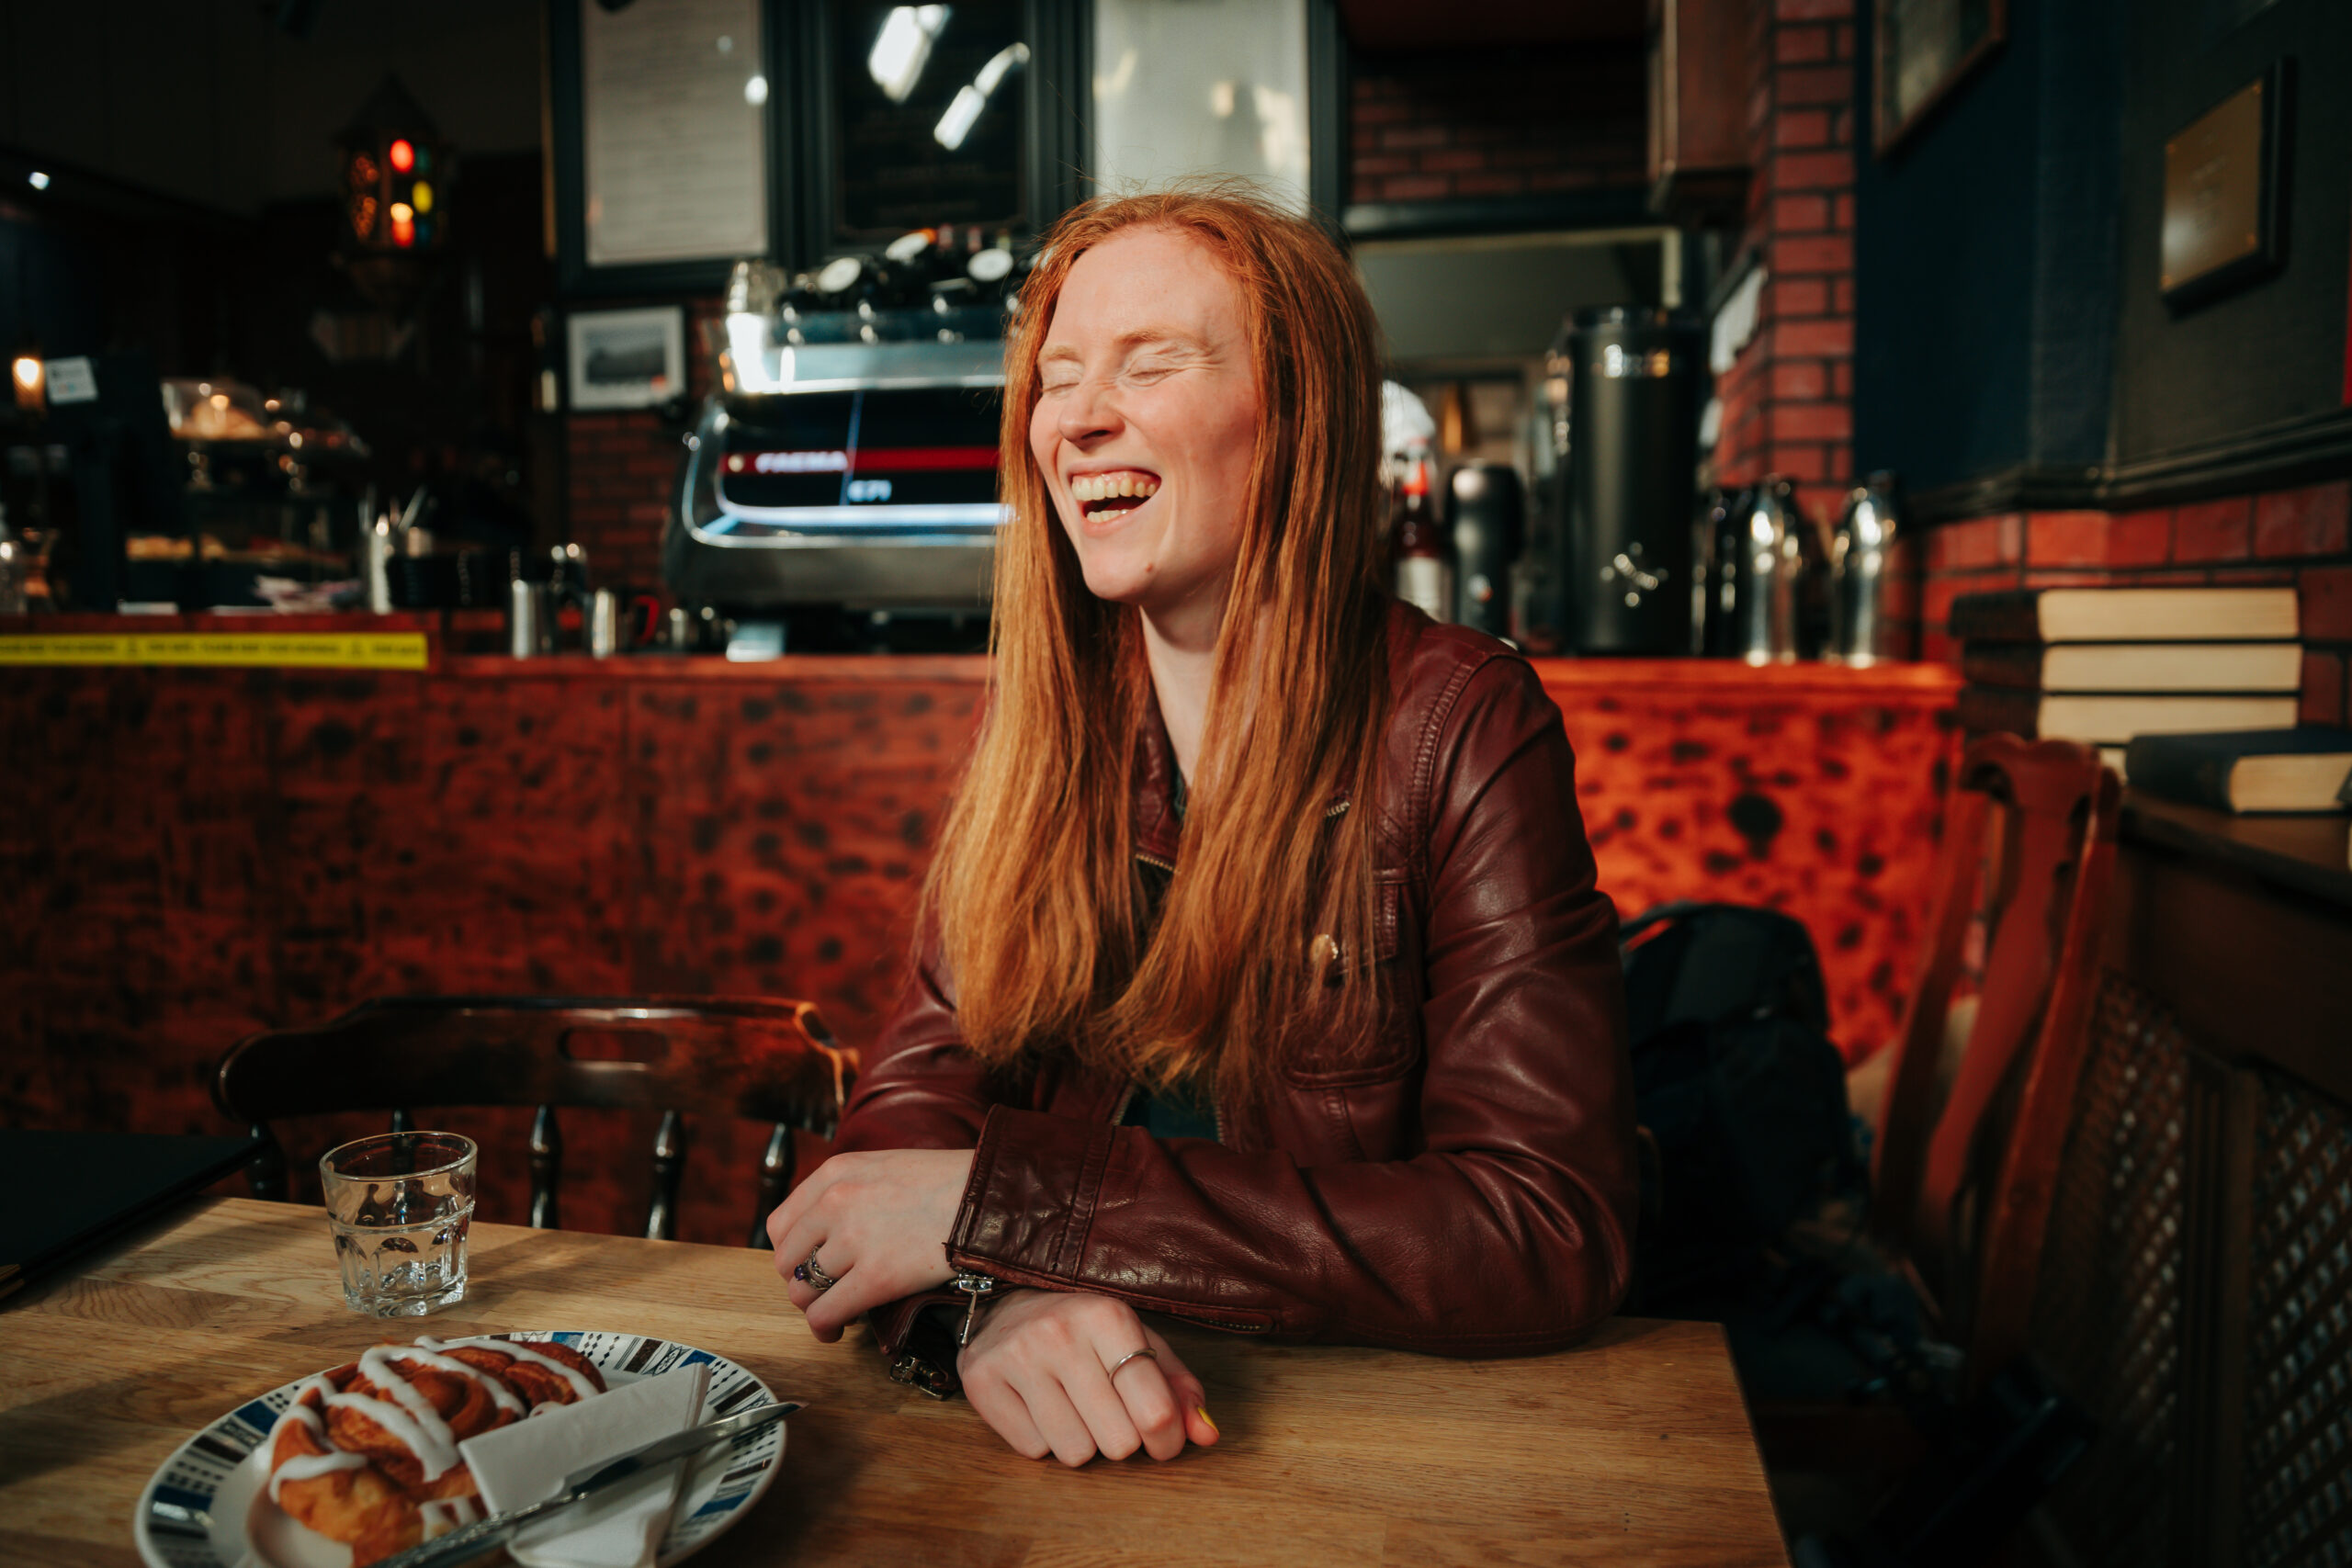 Photo of a red-haired woman sitting in a cafe laughing, with a cup of water and a pastry on the table in front of her.